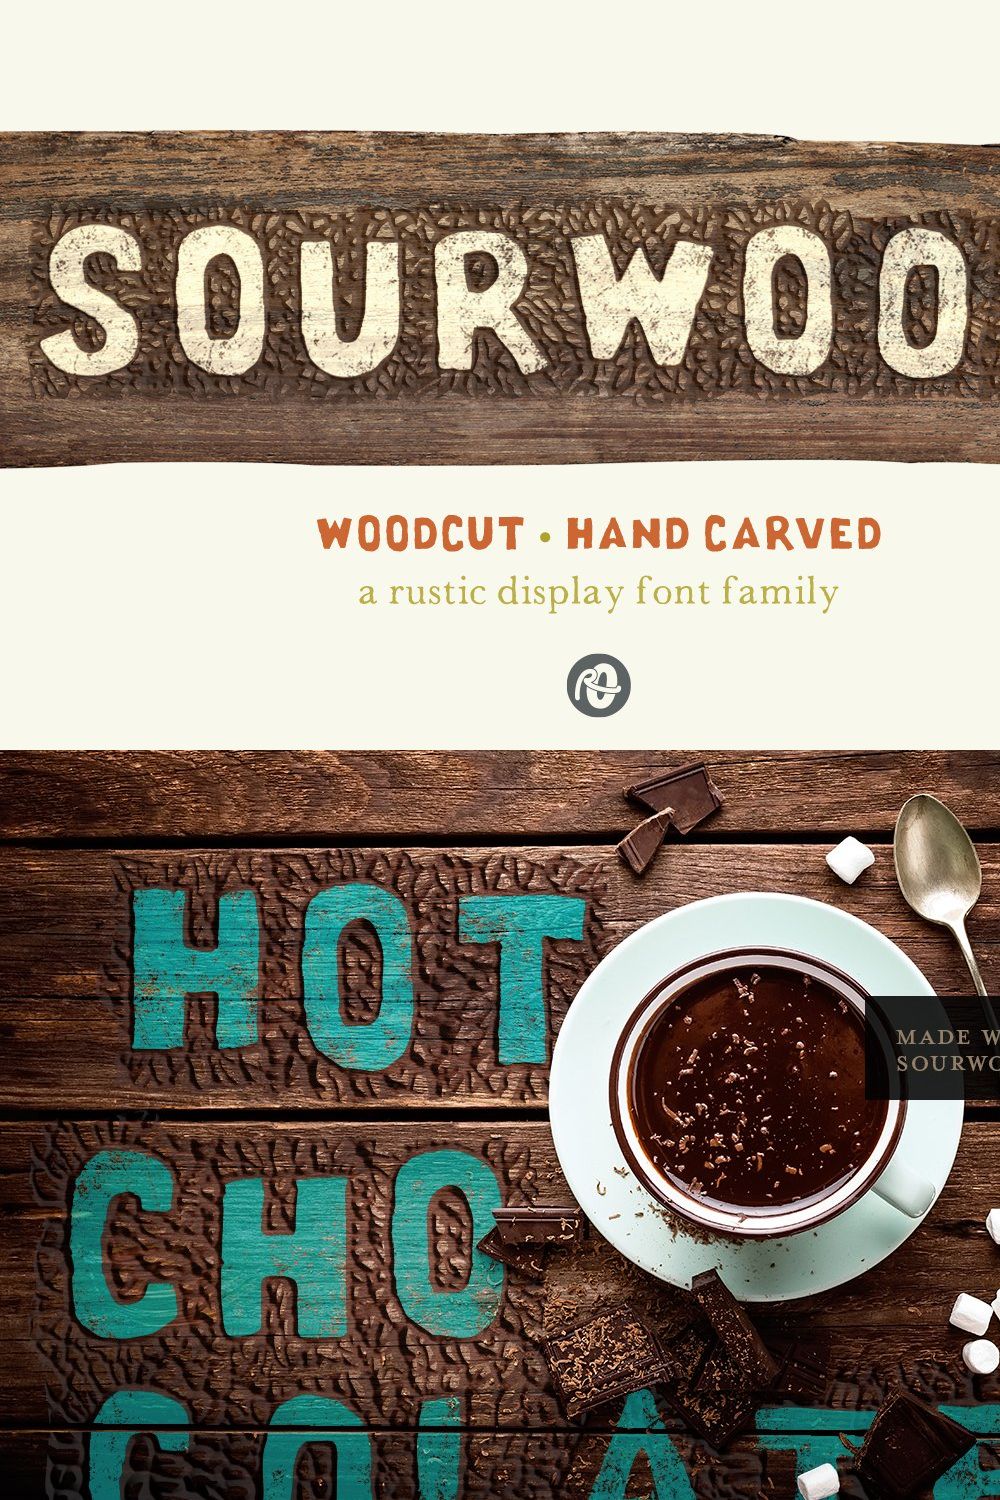 Sourwood: woodcut font family pinterest preview image.